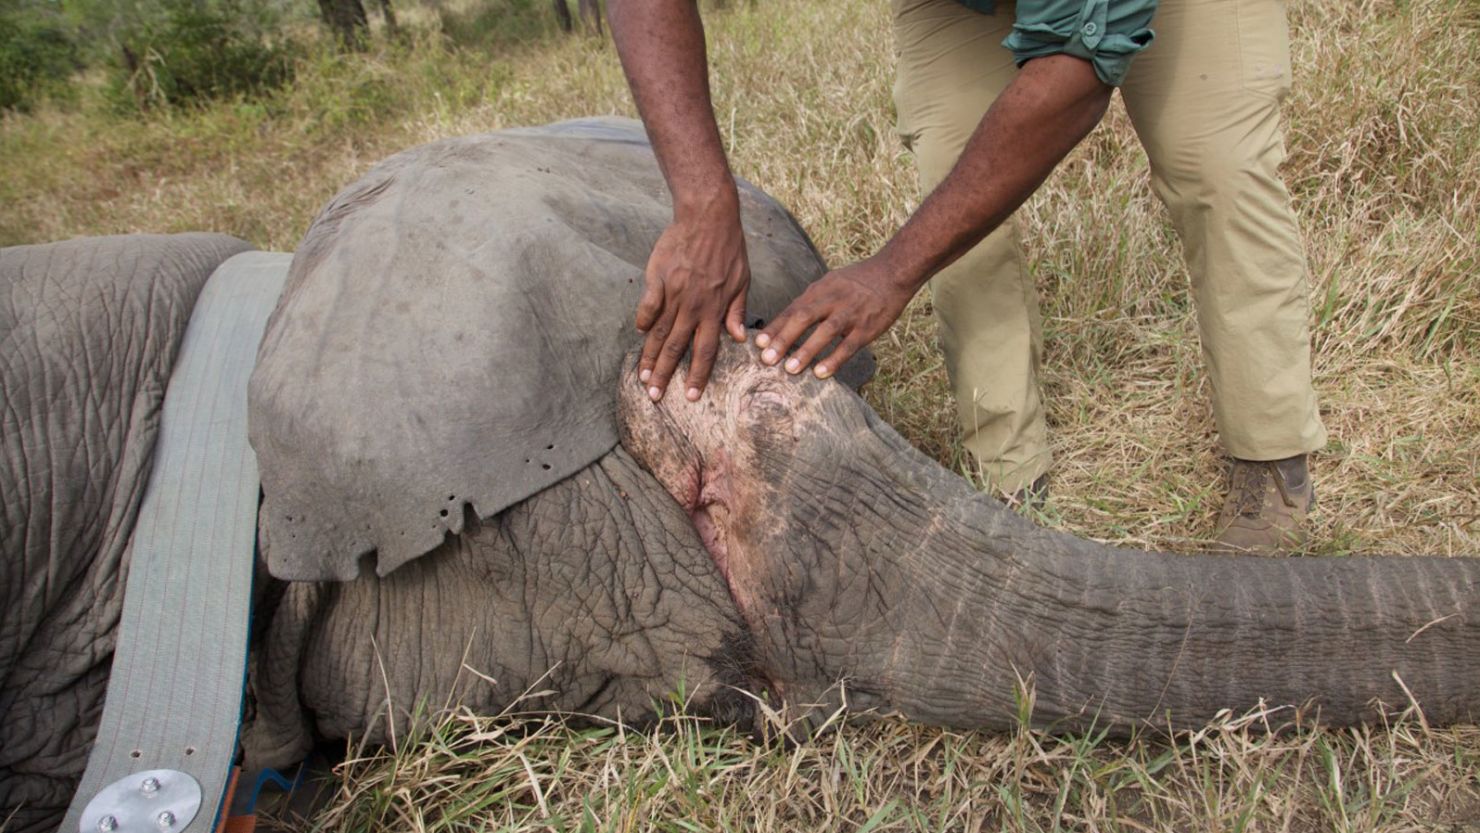 This image of a tranquilized tuskless female elephant in Mozambique's Gorongosa National Park was taken while genetic samples were collected in 2018.